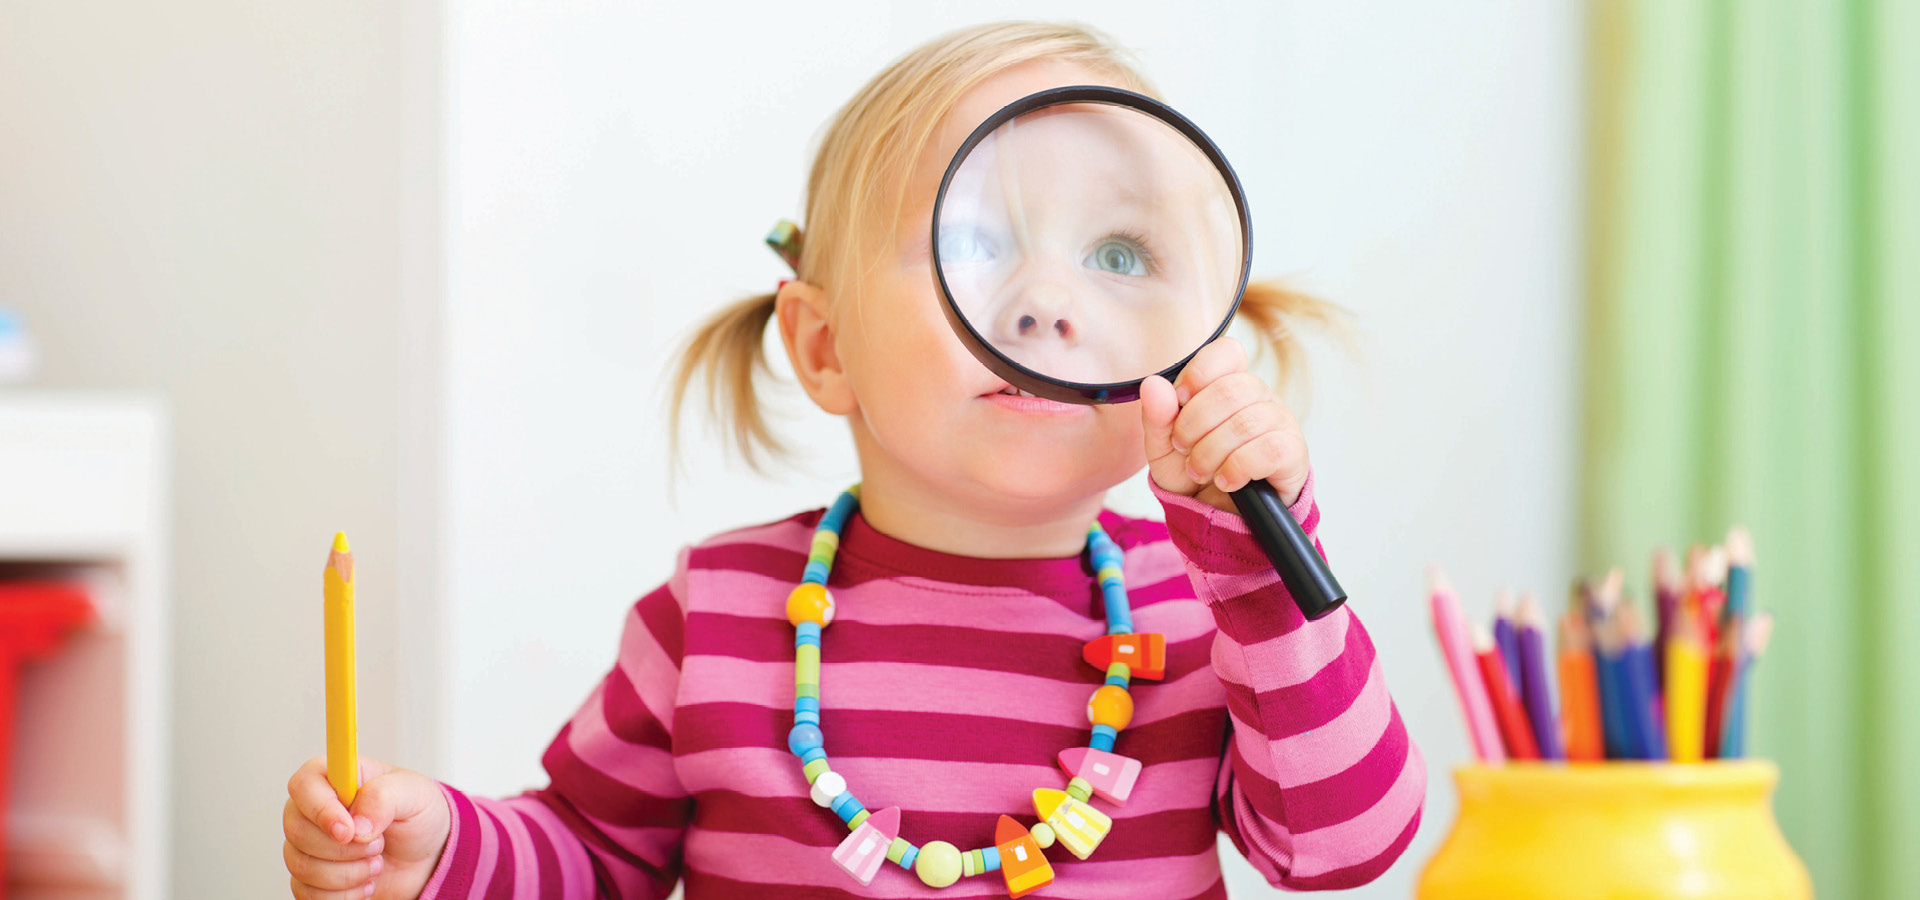 sunflower seed-  toddler girl looking through magnifier